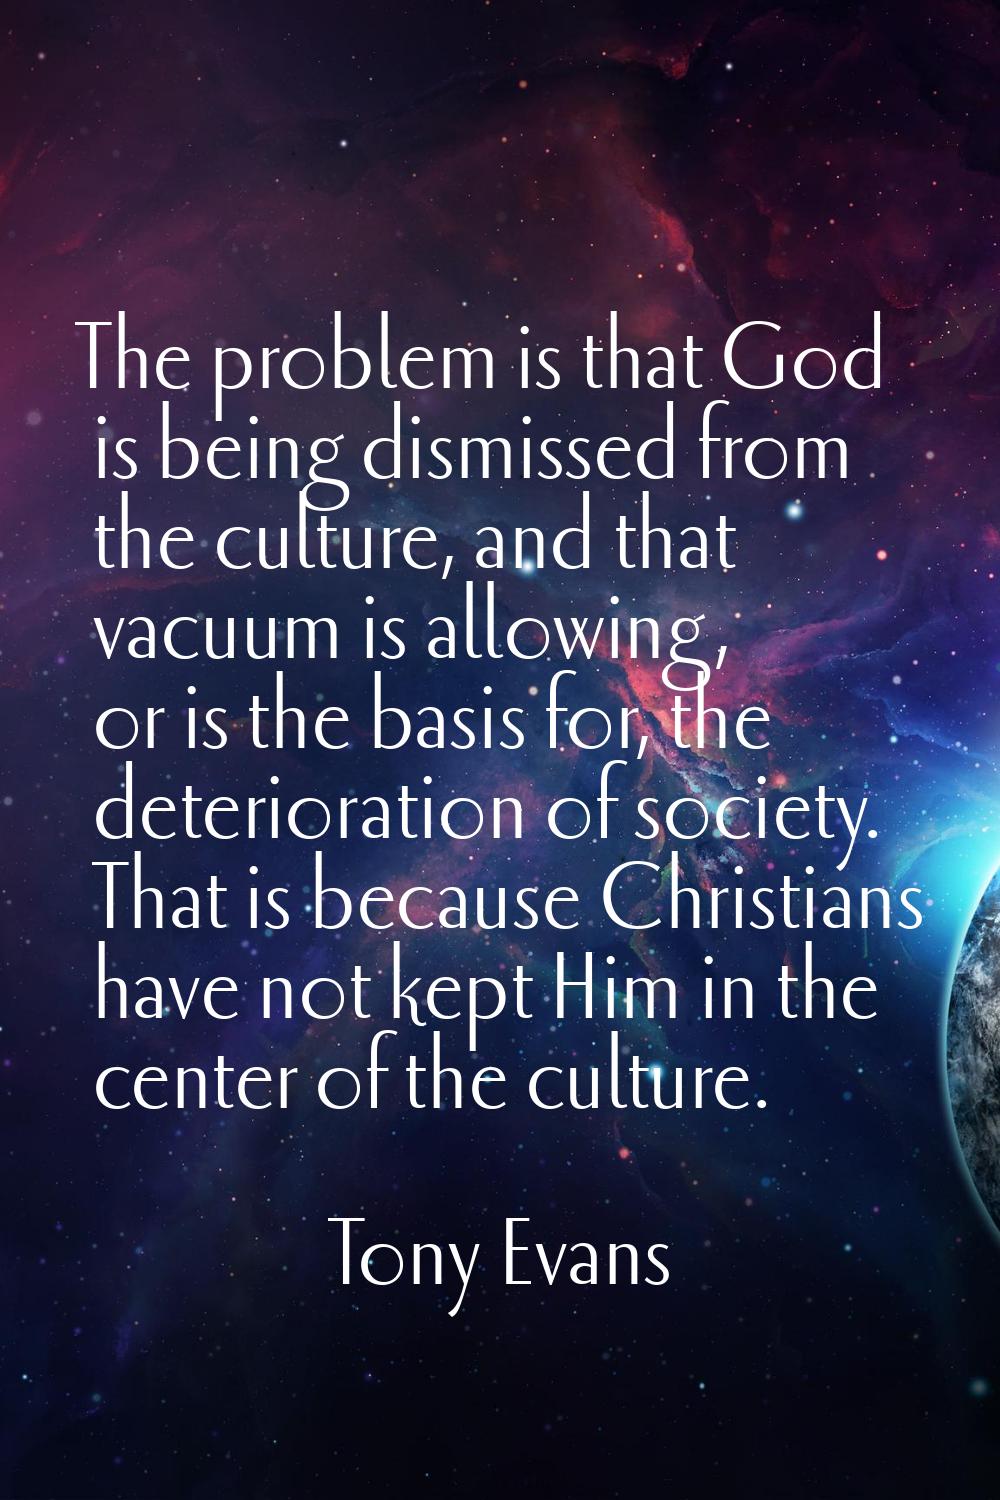 The problem is that God is being dismissed from the culture, and that vacuum is allowing, or is the